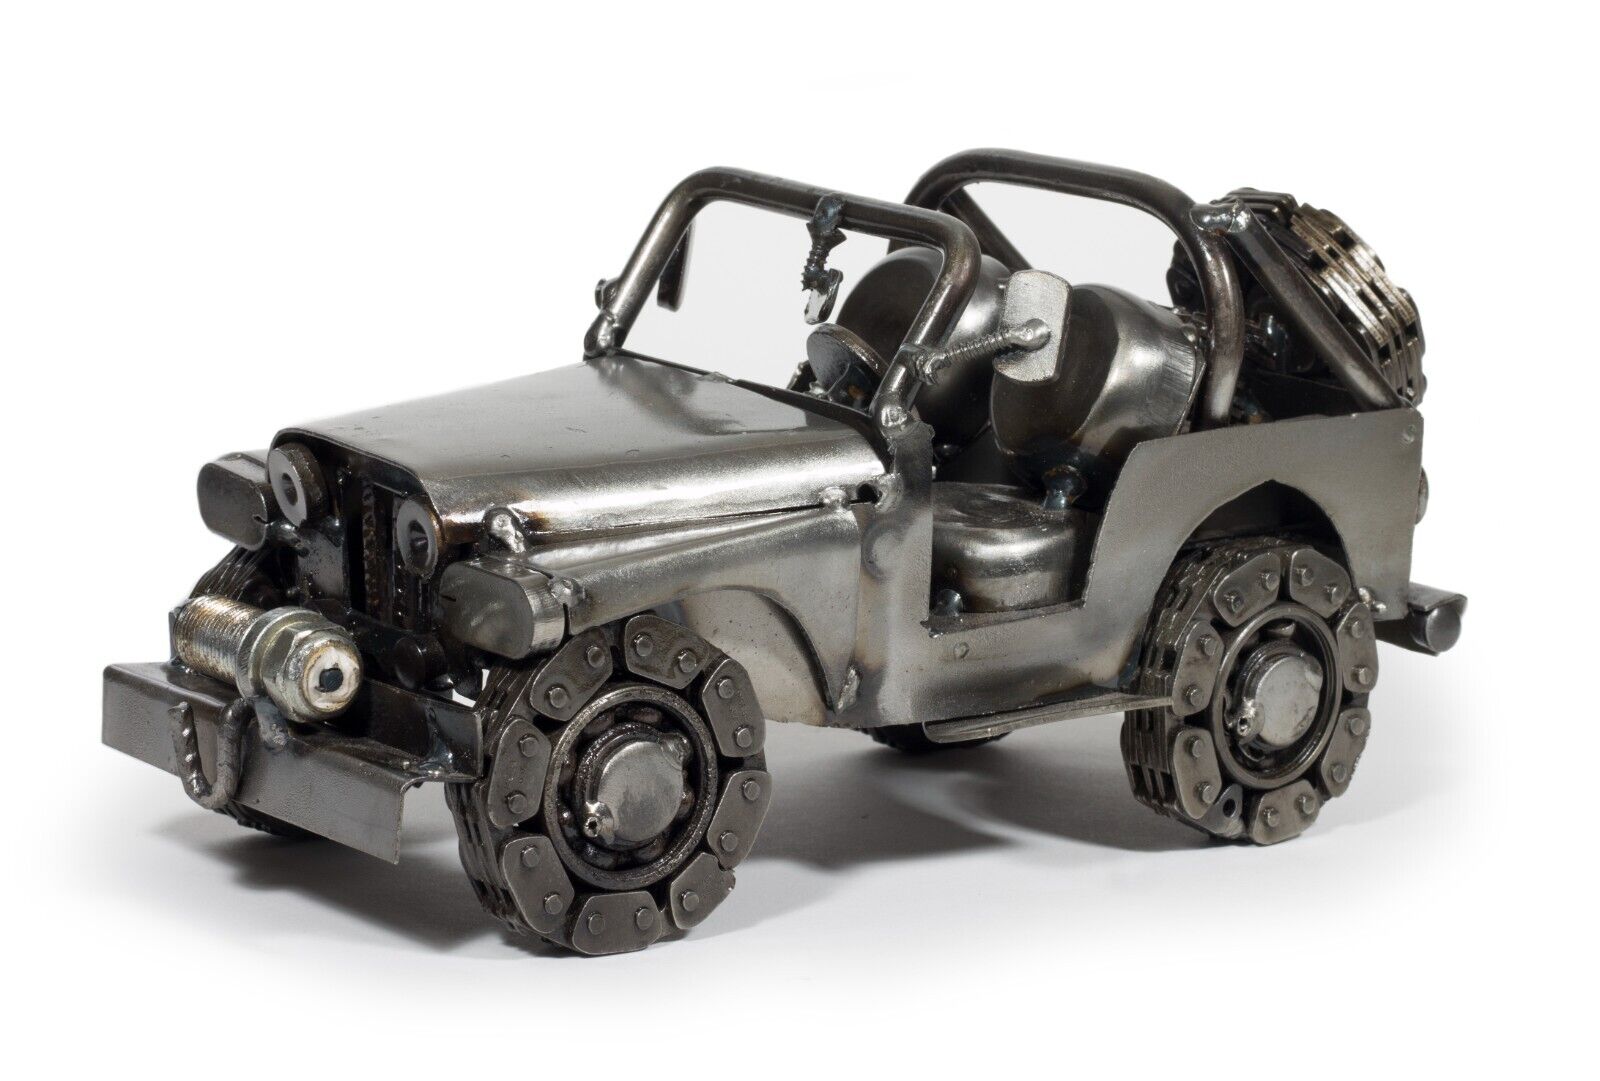 Artisan Off-Road Crafted 4 x 4 Metal Recycled Auto Parts Sculpture